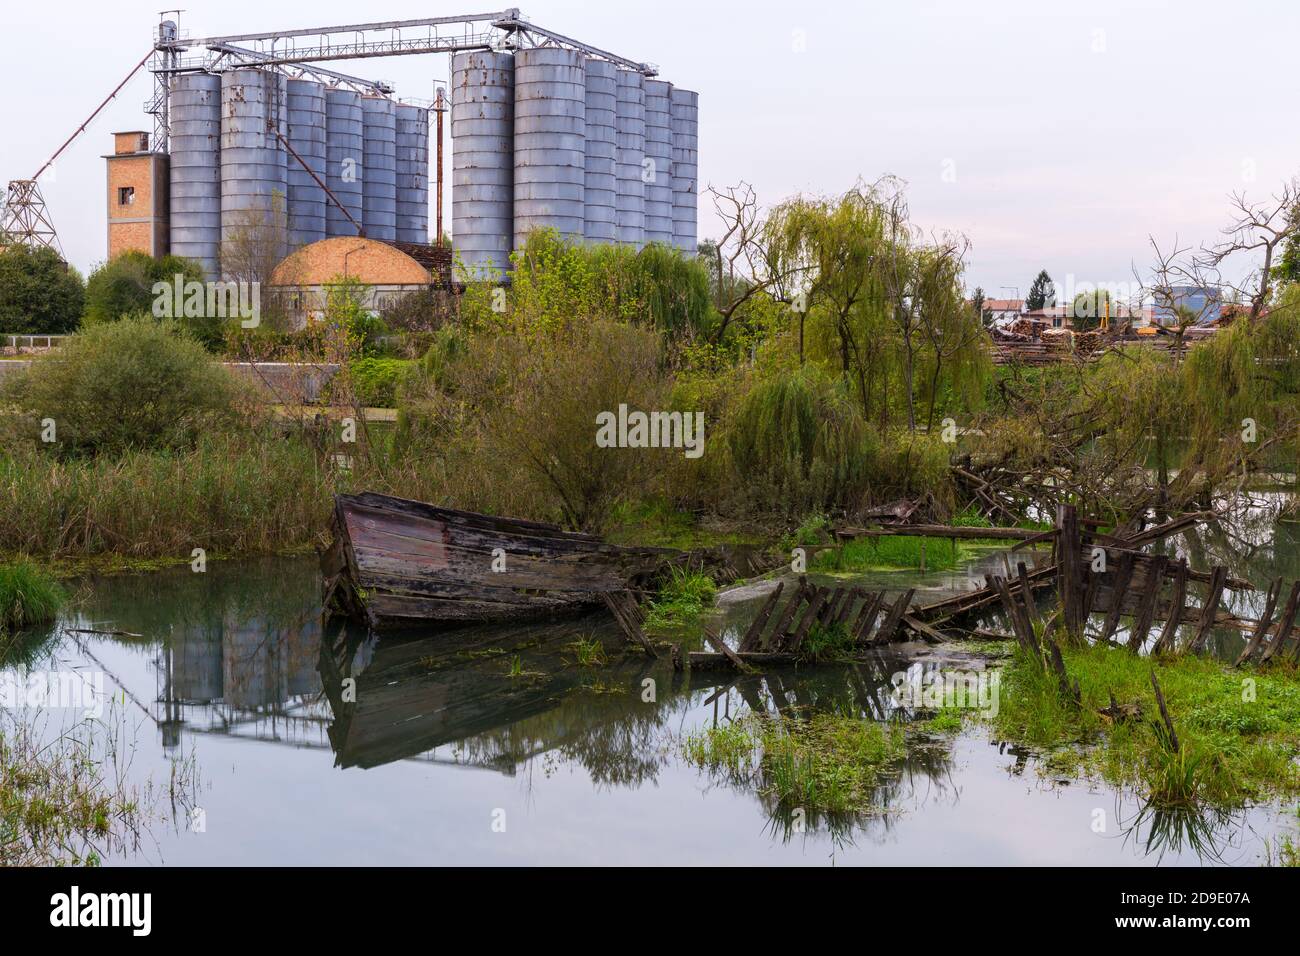 Historical cemetery of sunken wooden shipwrecks in the water in the Sile river called Burci cemetery with an abandoned factory with silos in the backg Stock Photo